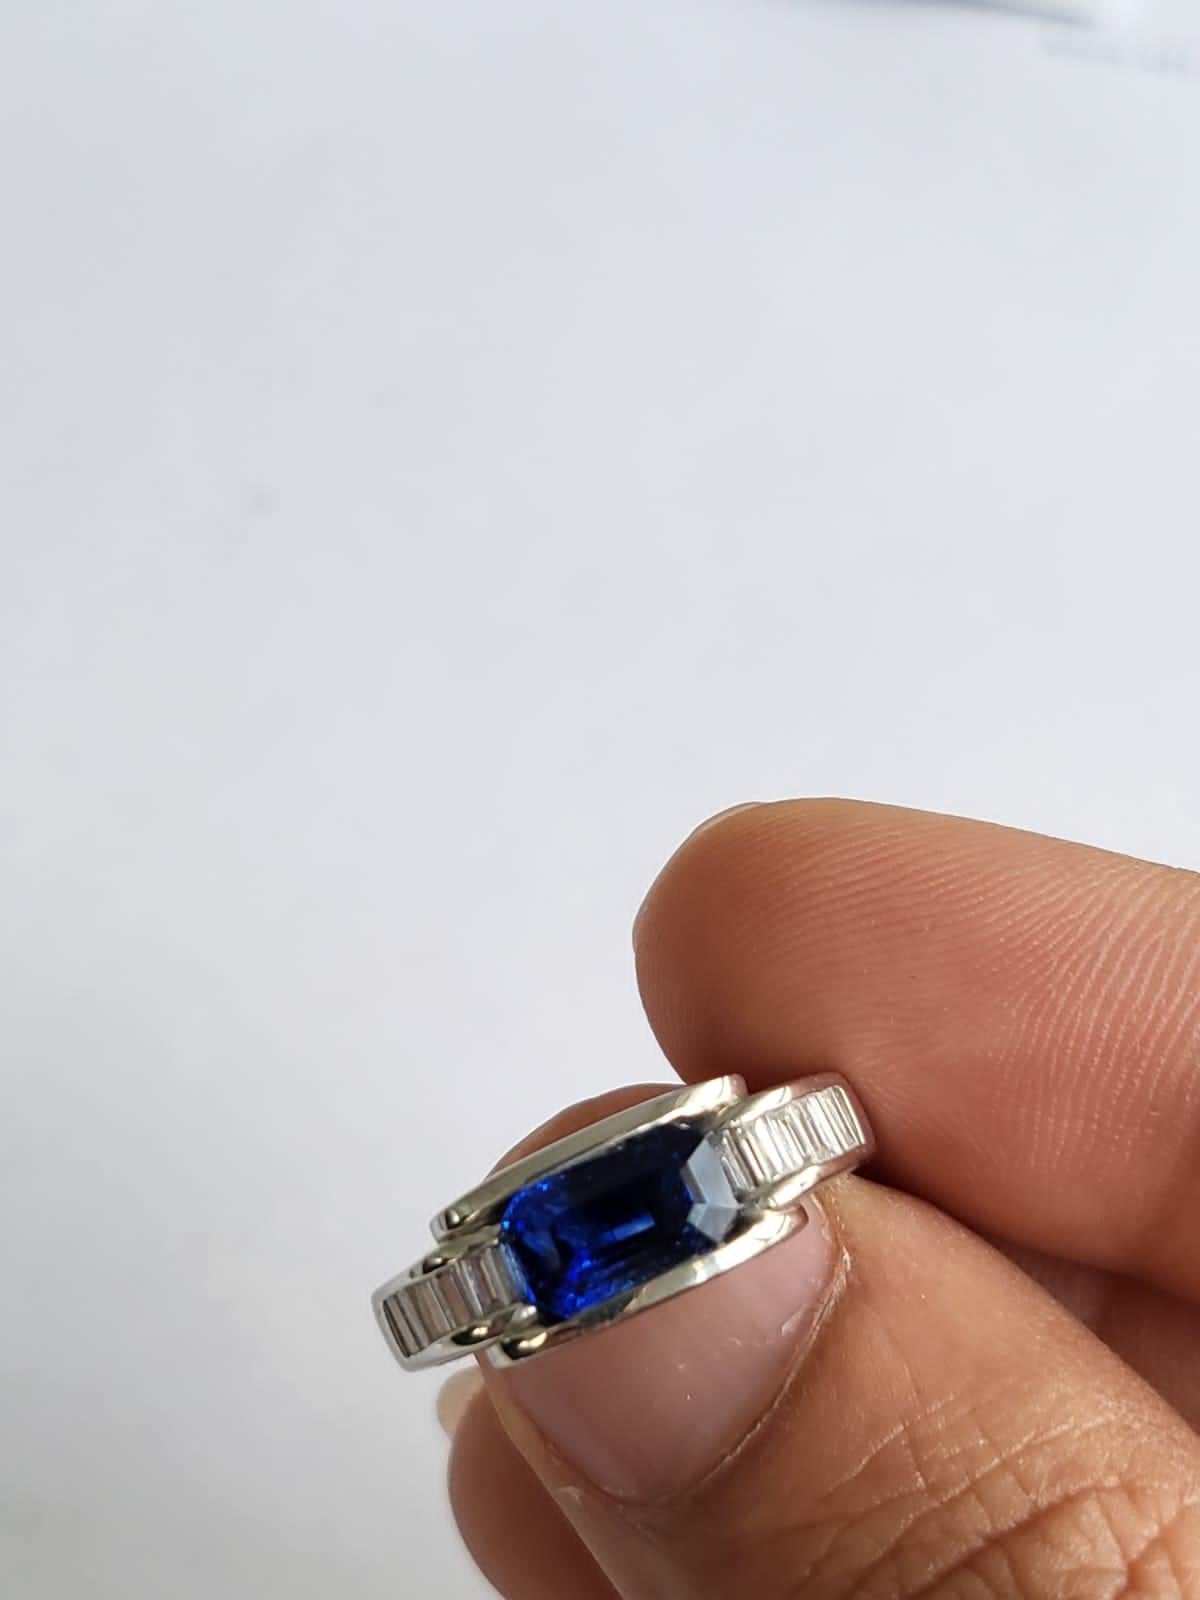 A very beautiful, Blue Sapphire Engagement Ring set in Platinum 900 & Diamonds. The weight of the Blue Sapphire & Diamonds. The weight of the Blue Sapphire is 2.13 carats. The Blue Sapphire is of Ceylon (Sri Lanka) origin. The weight of the Diamonds